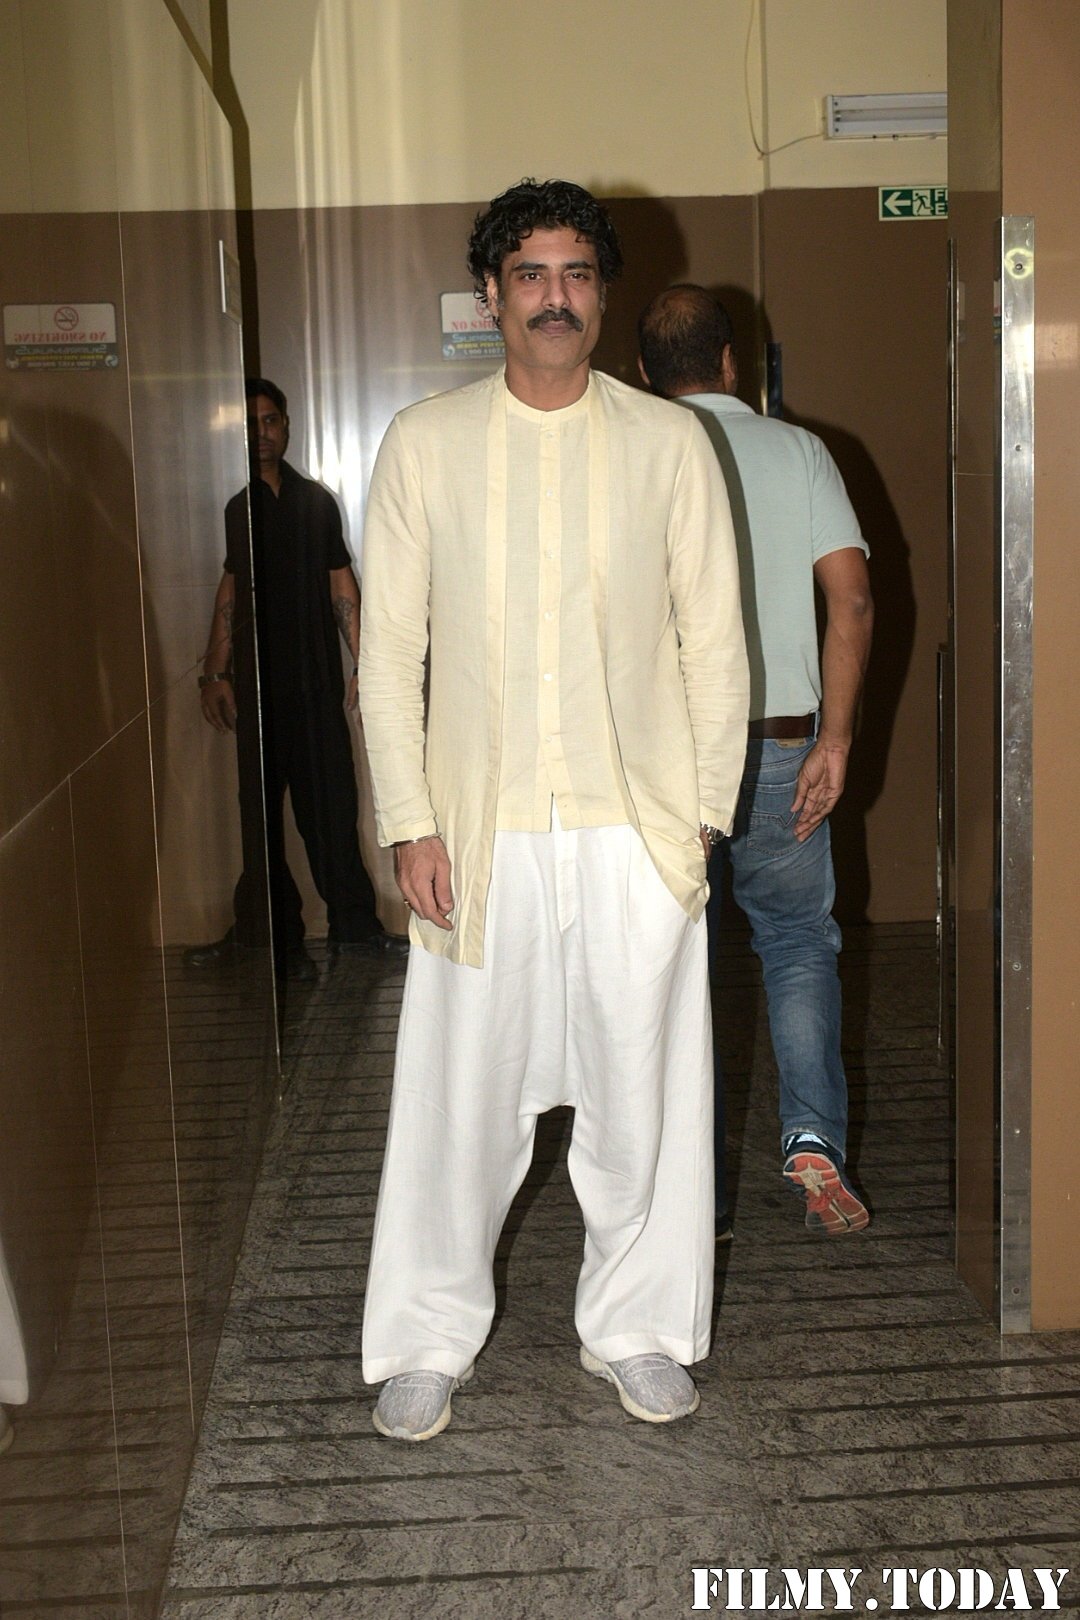 Photos: Screening Of Zoya Factor At Pvr Juhu | Picture 1684019